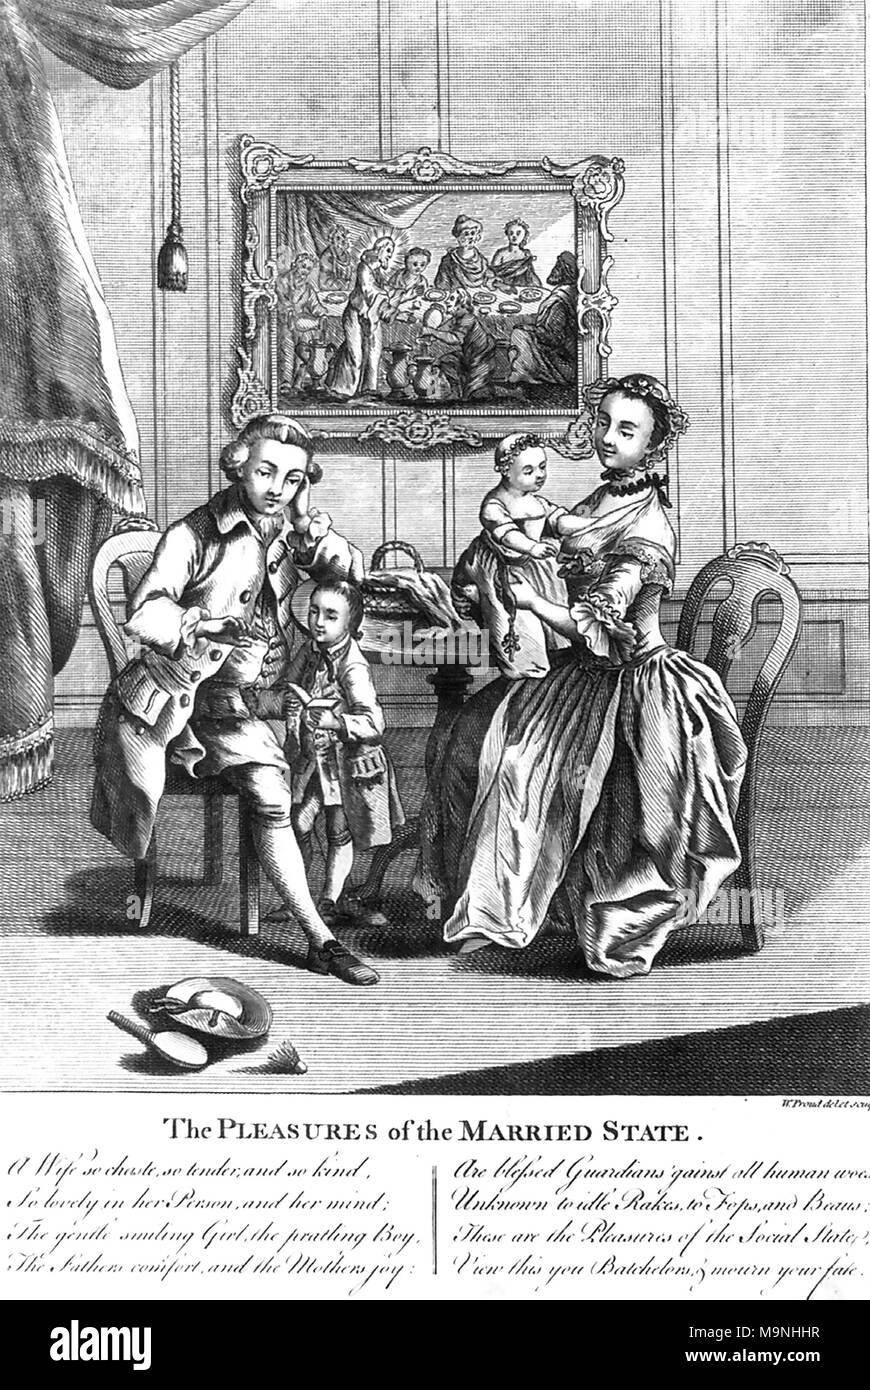 THE PLEASURES OF THE MARRIED STATE Engraving about 1780 showing a happy Georgian family scene. On the floor are the bat and ball for a game of shuttlecock together with an outdoor hat. Stock Photo